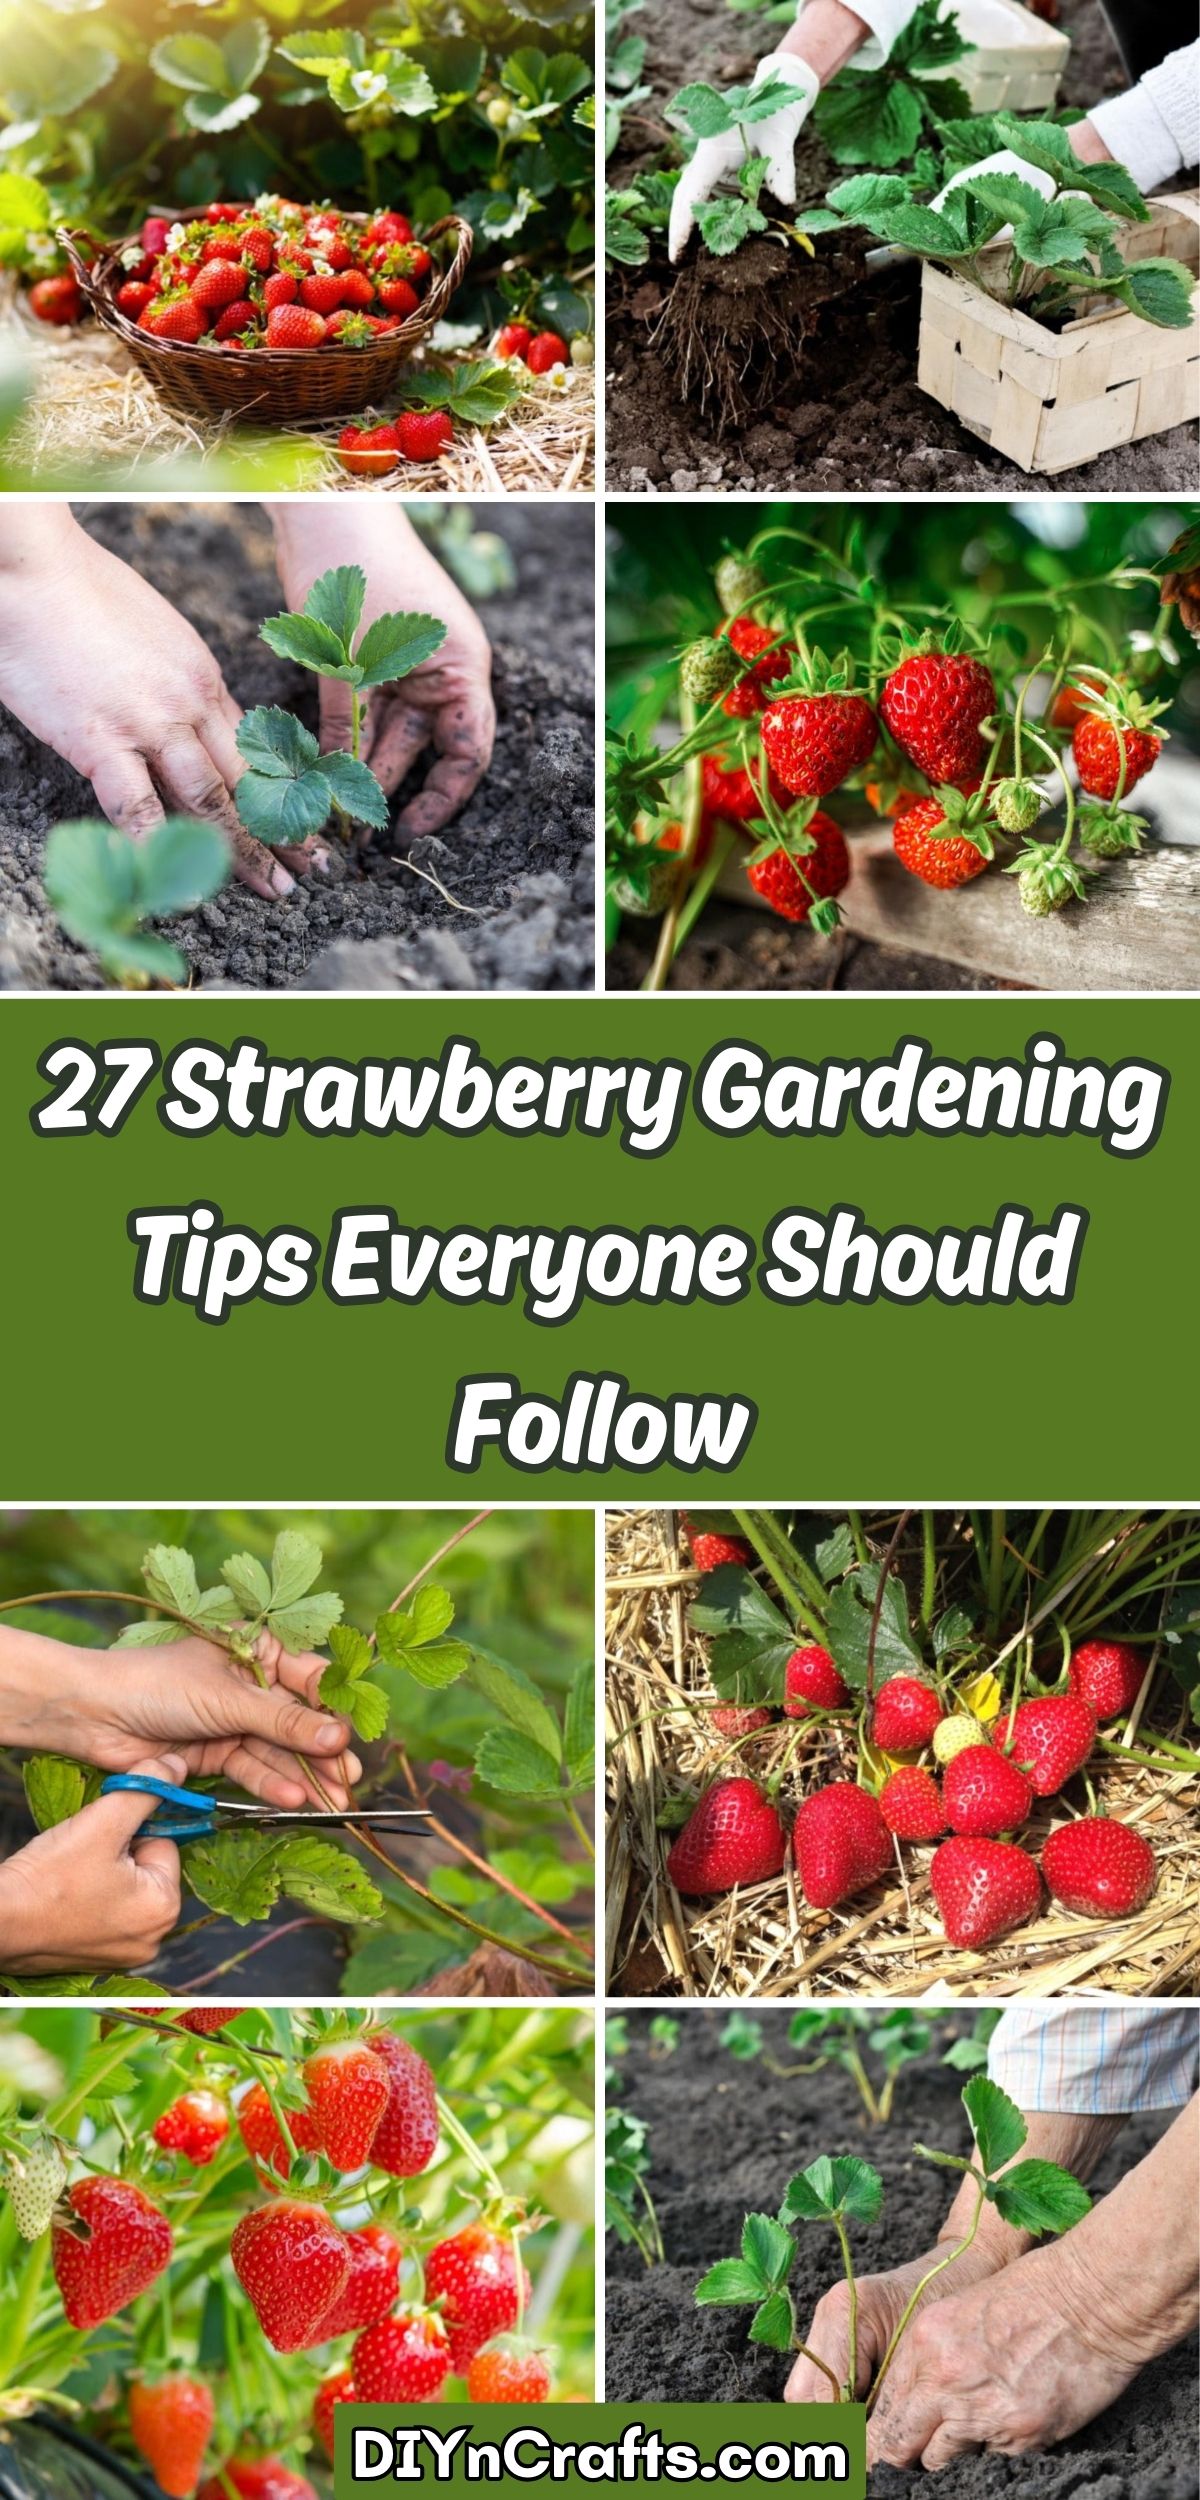 27 Strawberry Gardening Tips Everyone Should Follow collage.